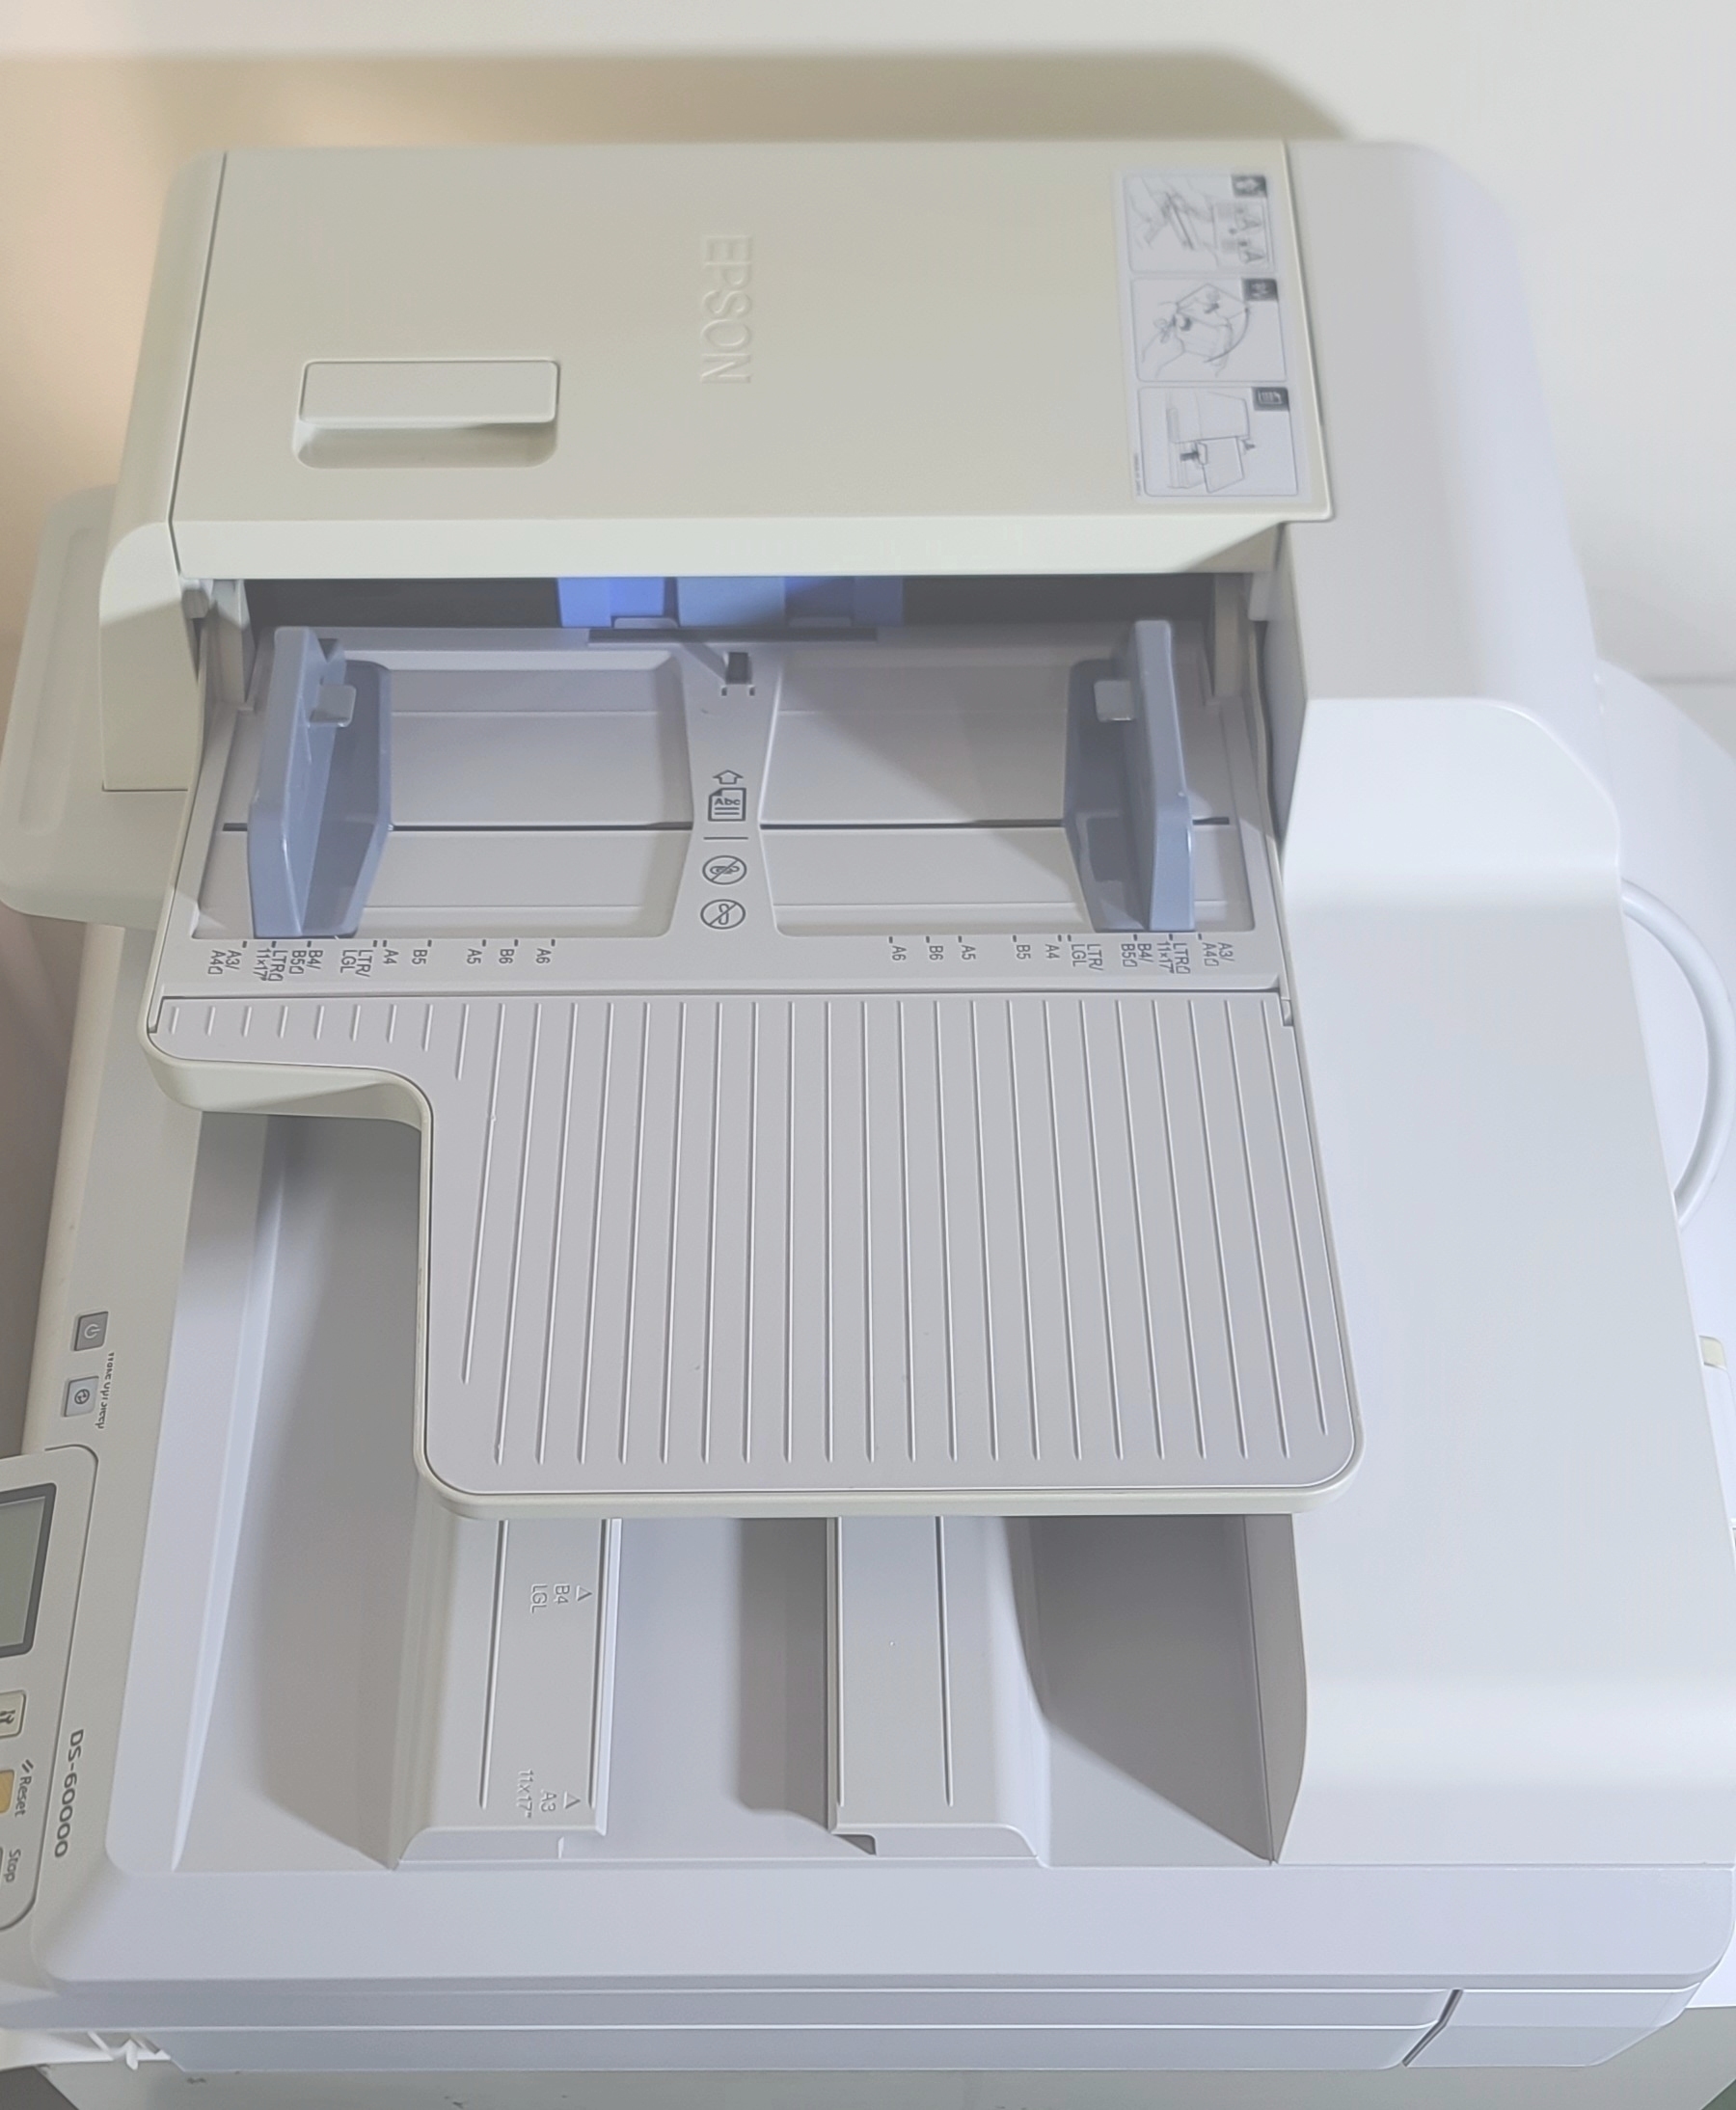 [ Saitama departure ][EPSON]A3 document scanner DS-60000 * network panel installing * counter 5166 sheets * operation verification settled * (9-4206)